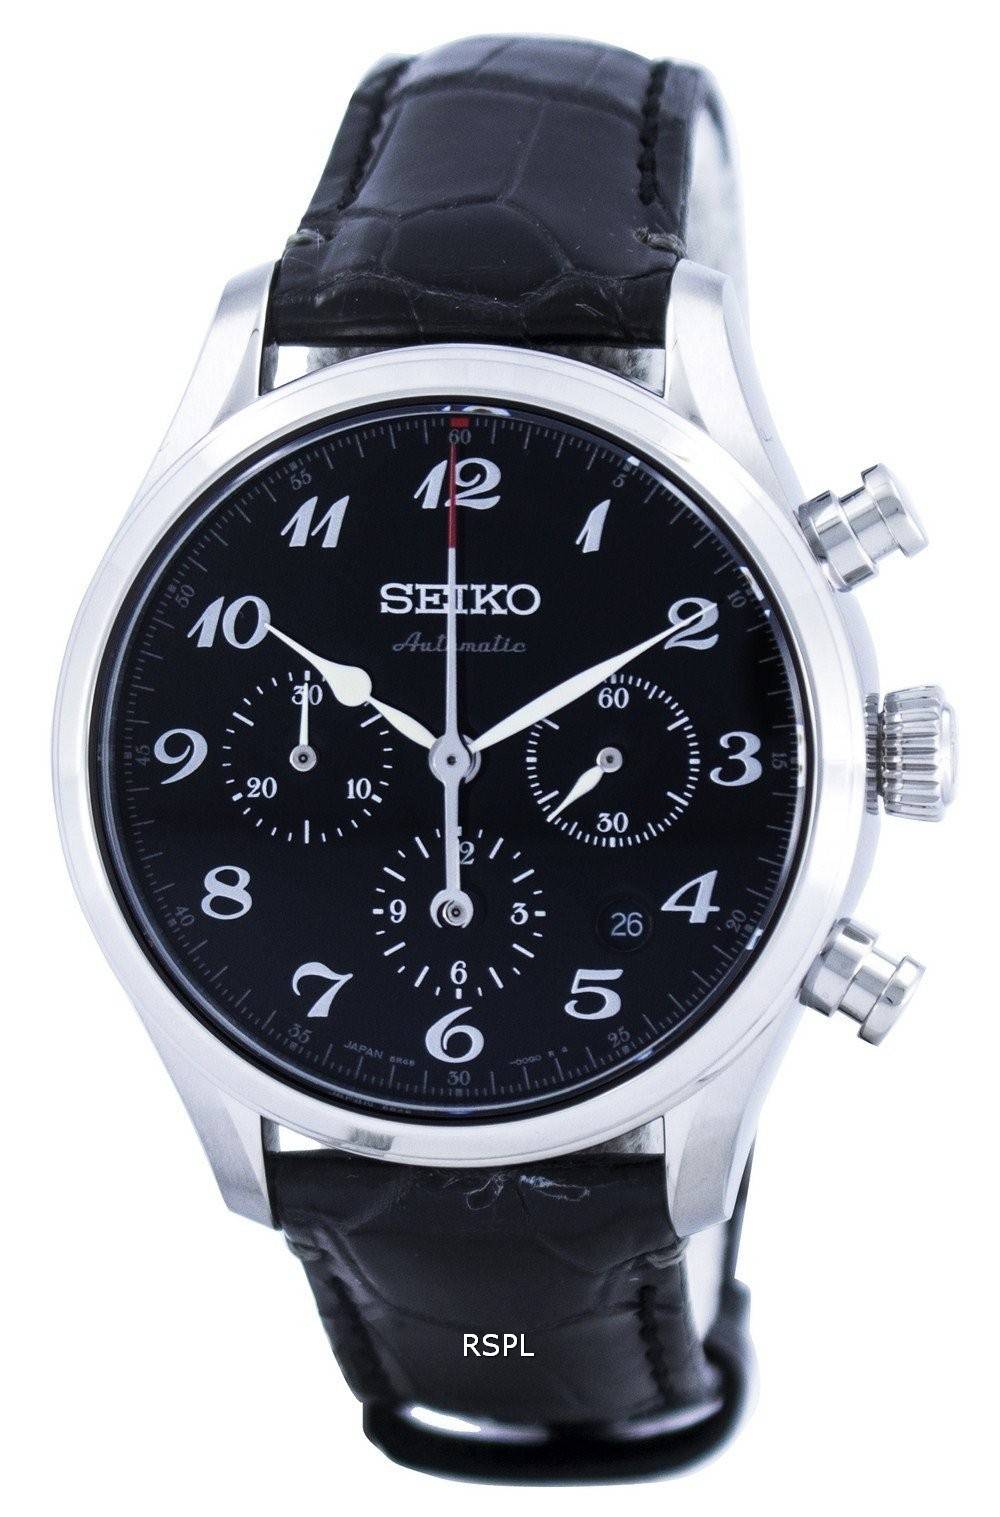 Seiko The Product Of A Century And More Of Seiko Automatic Watch 60th  Anniversary Limited Editions: SRQ021 The Pure, Deep Black Of Urushi Lacquer  SRQ019 